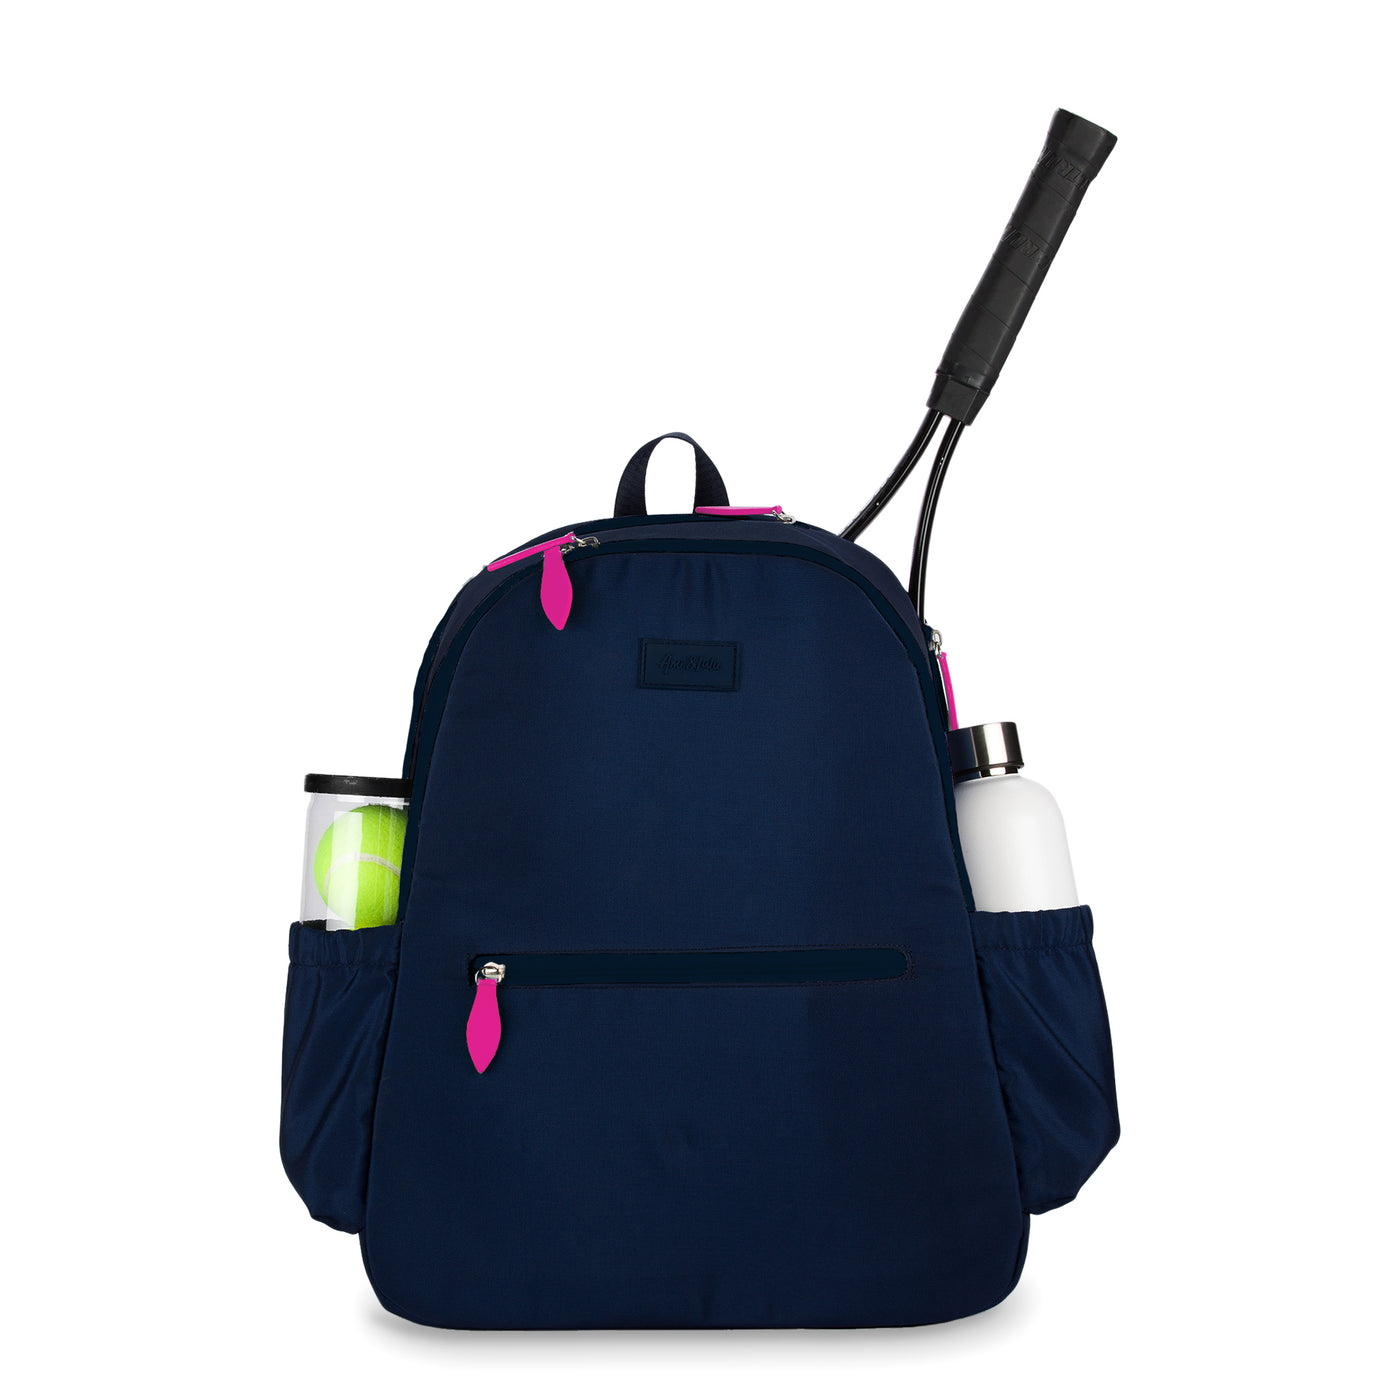 Front view of navy courtside tennis backpack with hot pink zippers. There is a racquet held inside the bag in the racquet pocket.